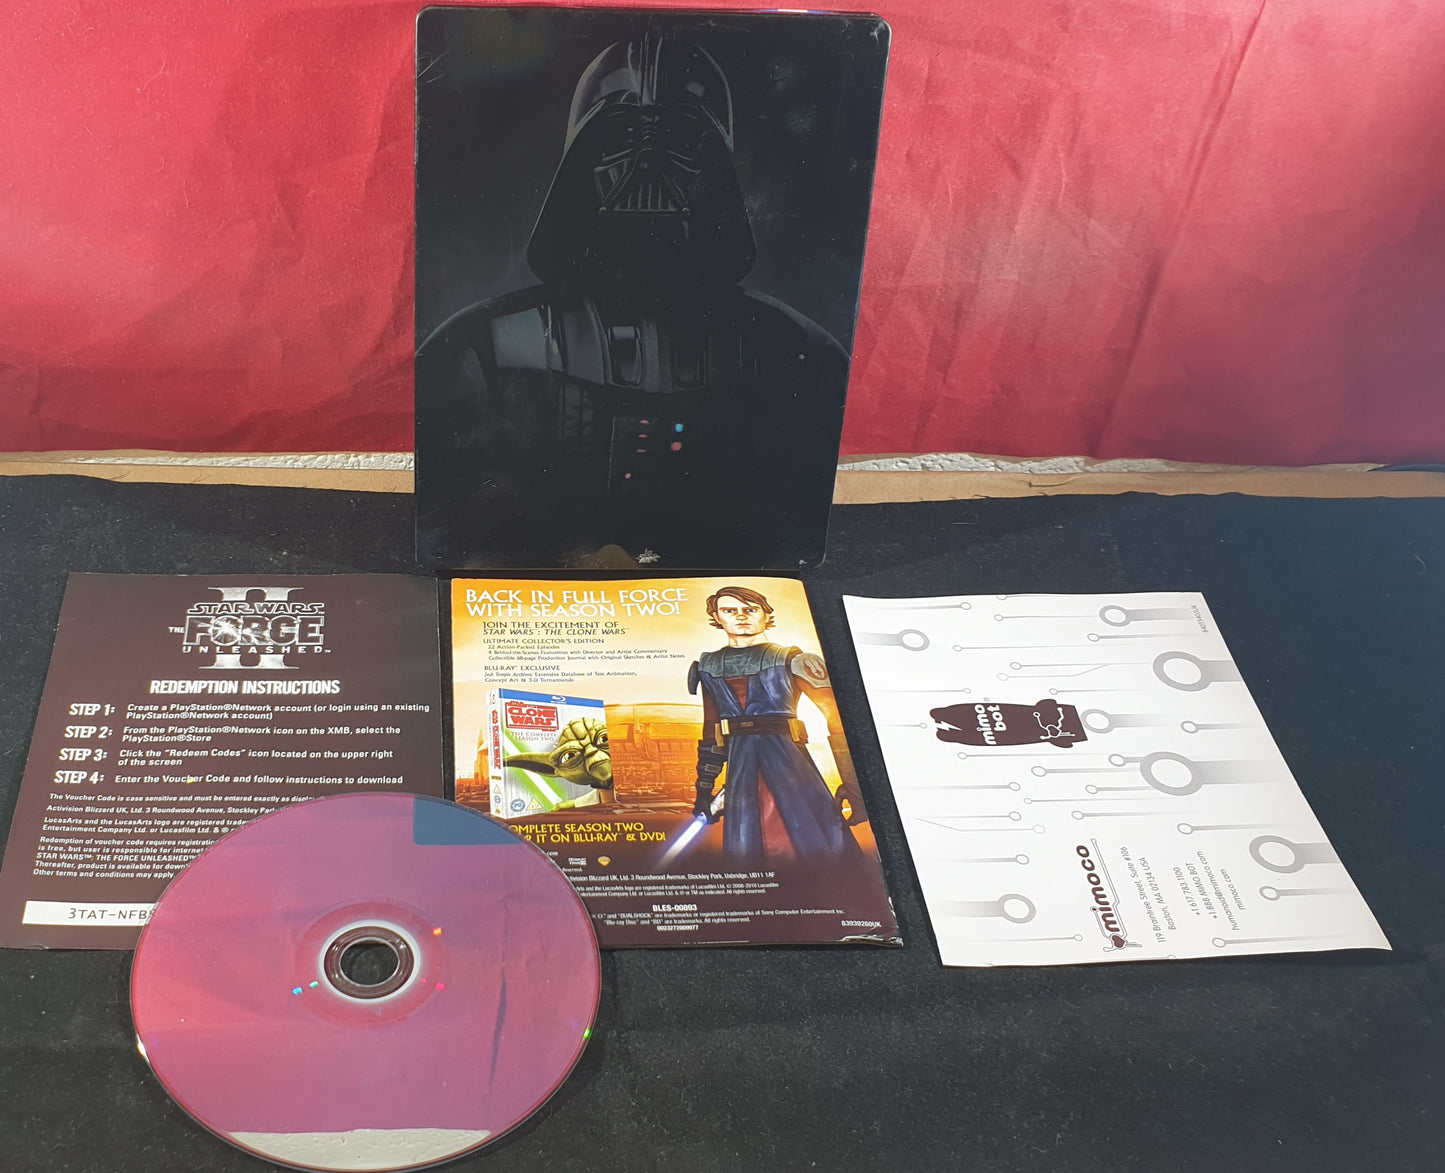 Star Wars the Force Unleashed II in RARE Steel Case Sony Playstation 3 (PS3) Game